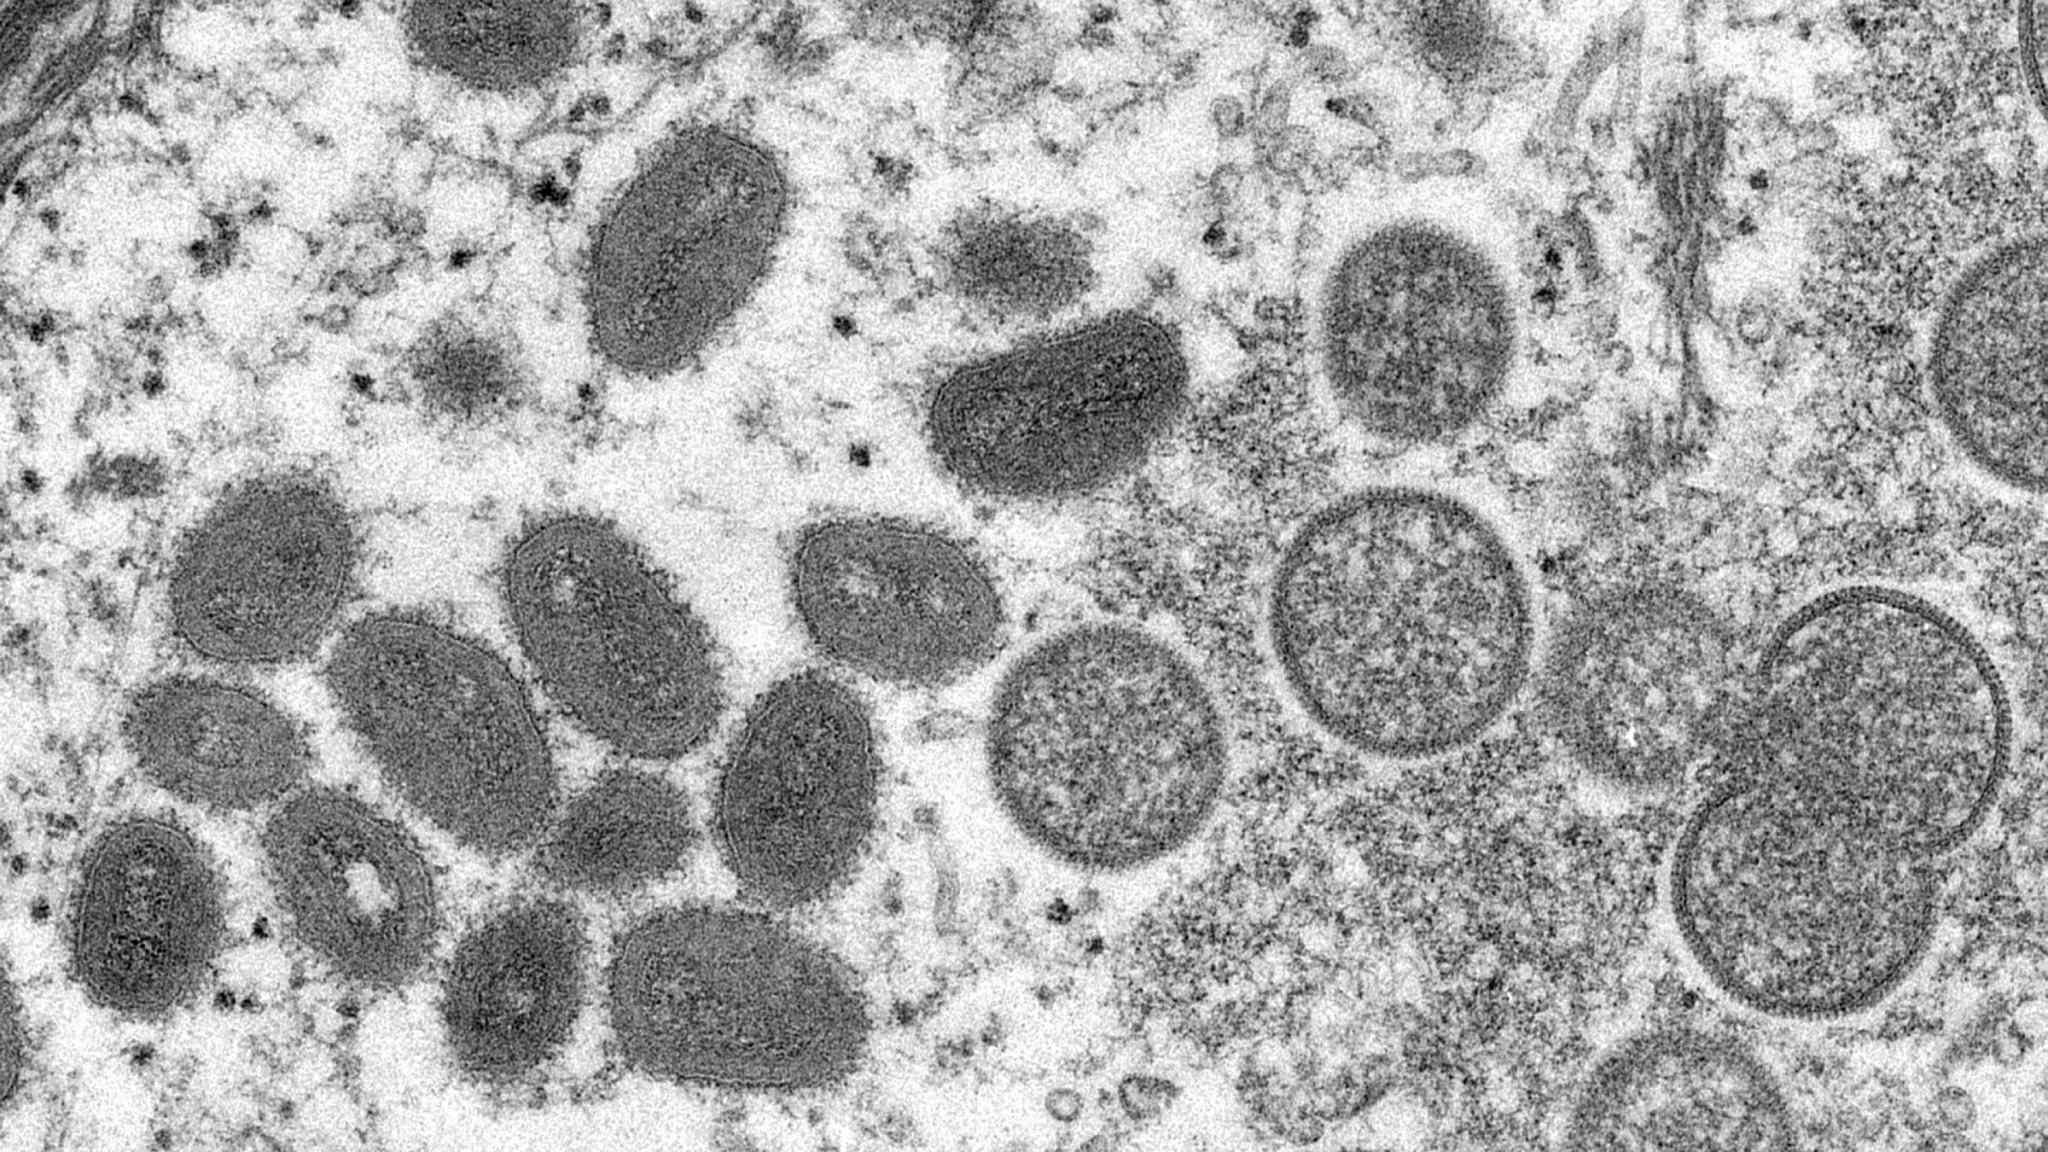 US records first monkeypox case since virus reported in Europe